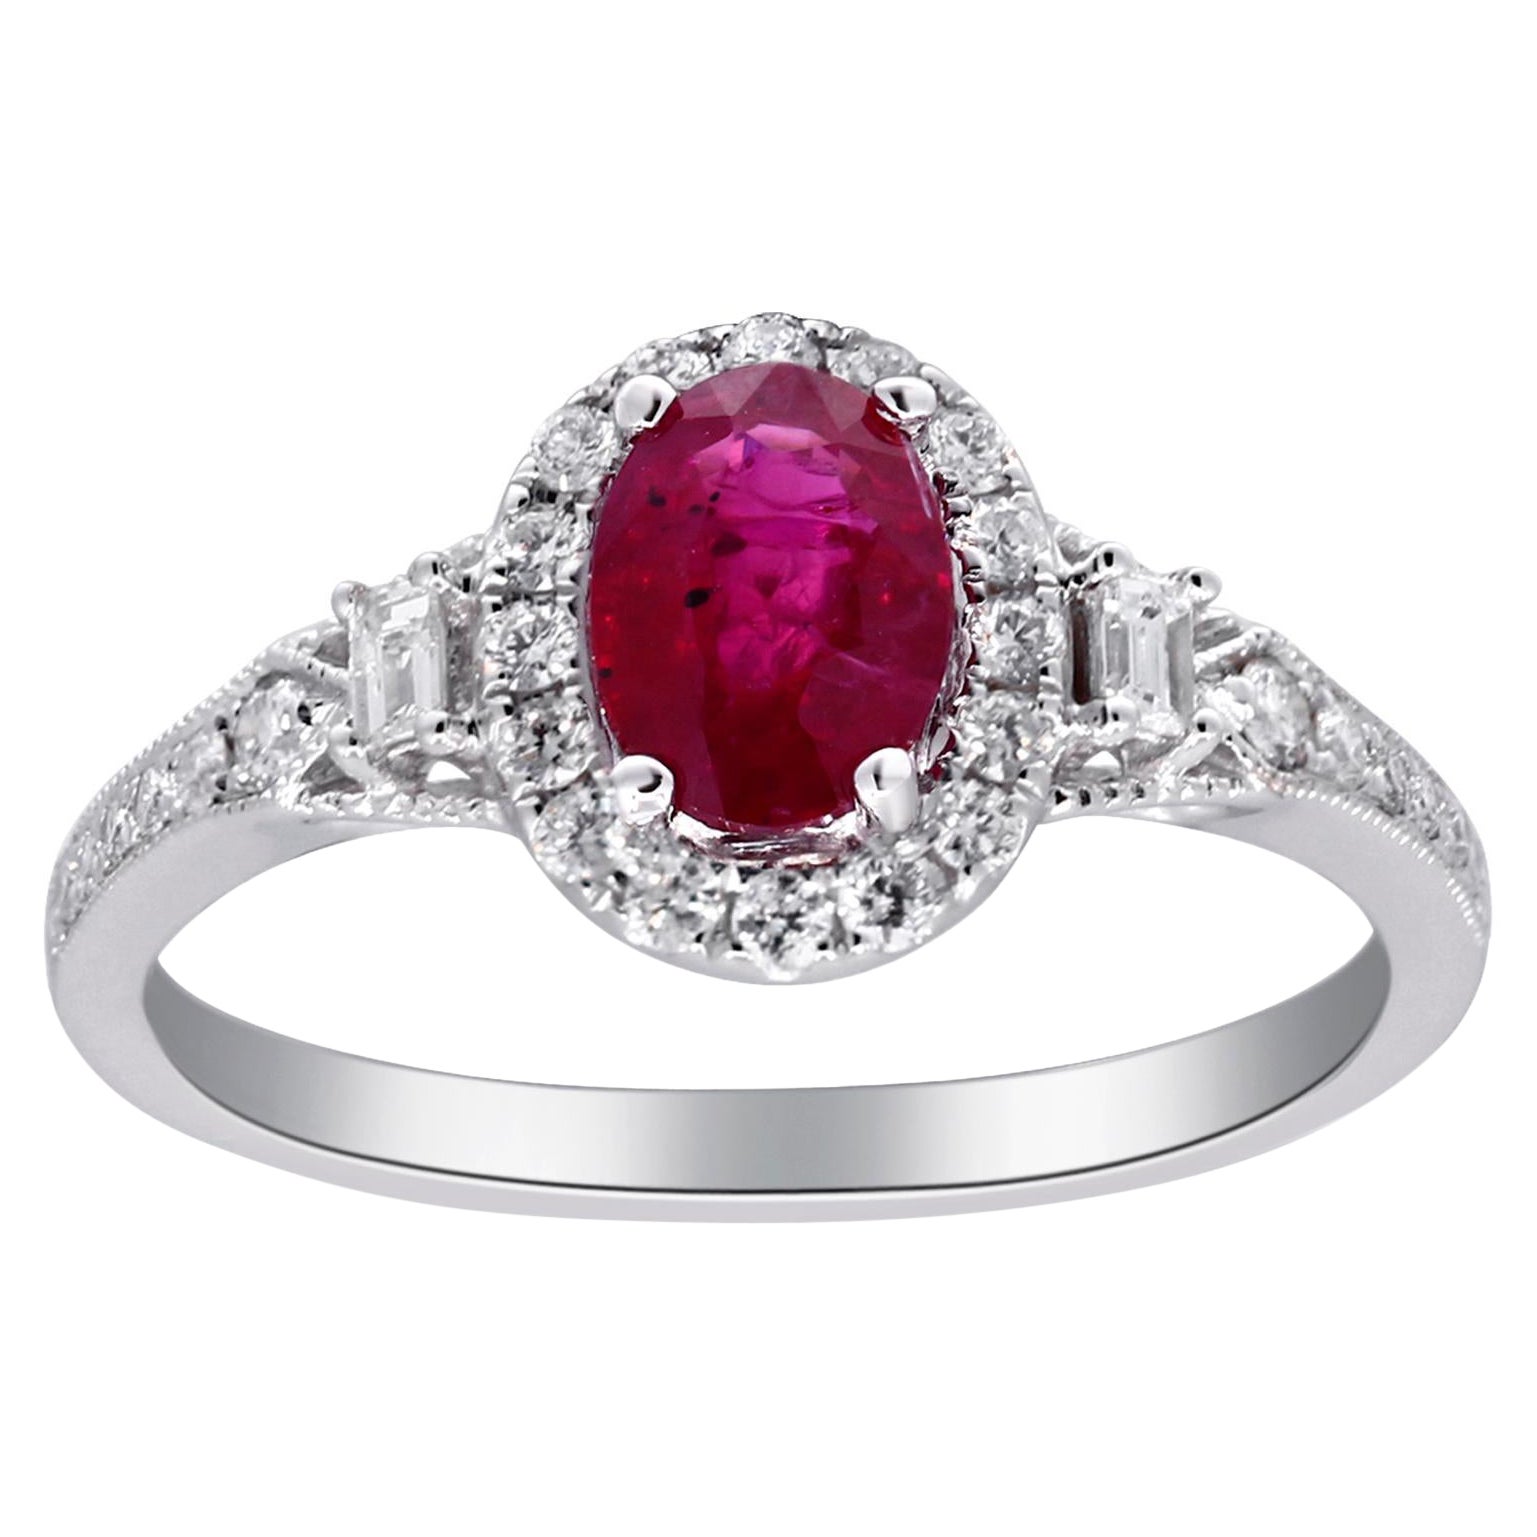 0.98 Carat Oval-Cut Ruby with Diamond Accents 14K White Gold Ring For Sale